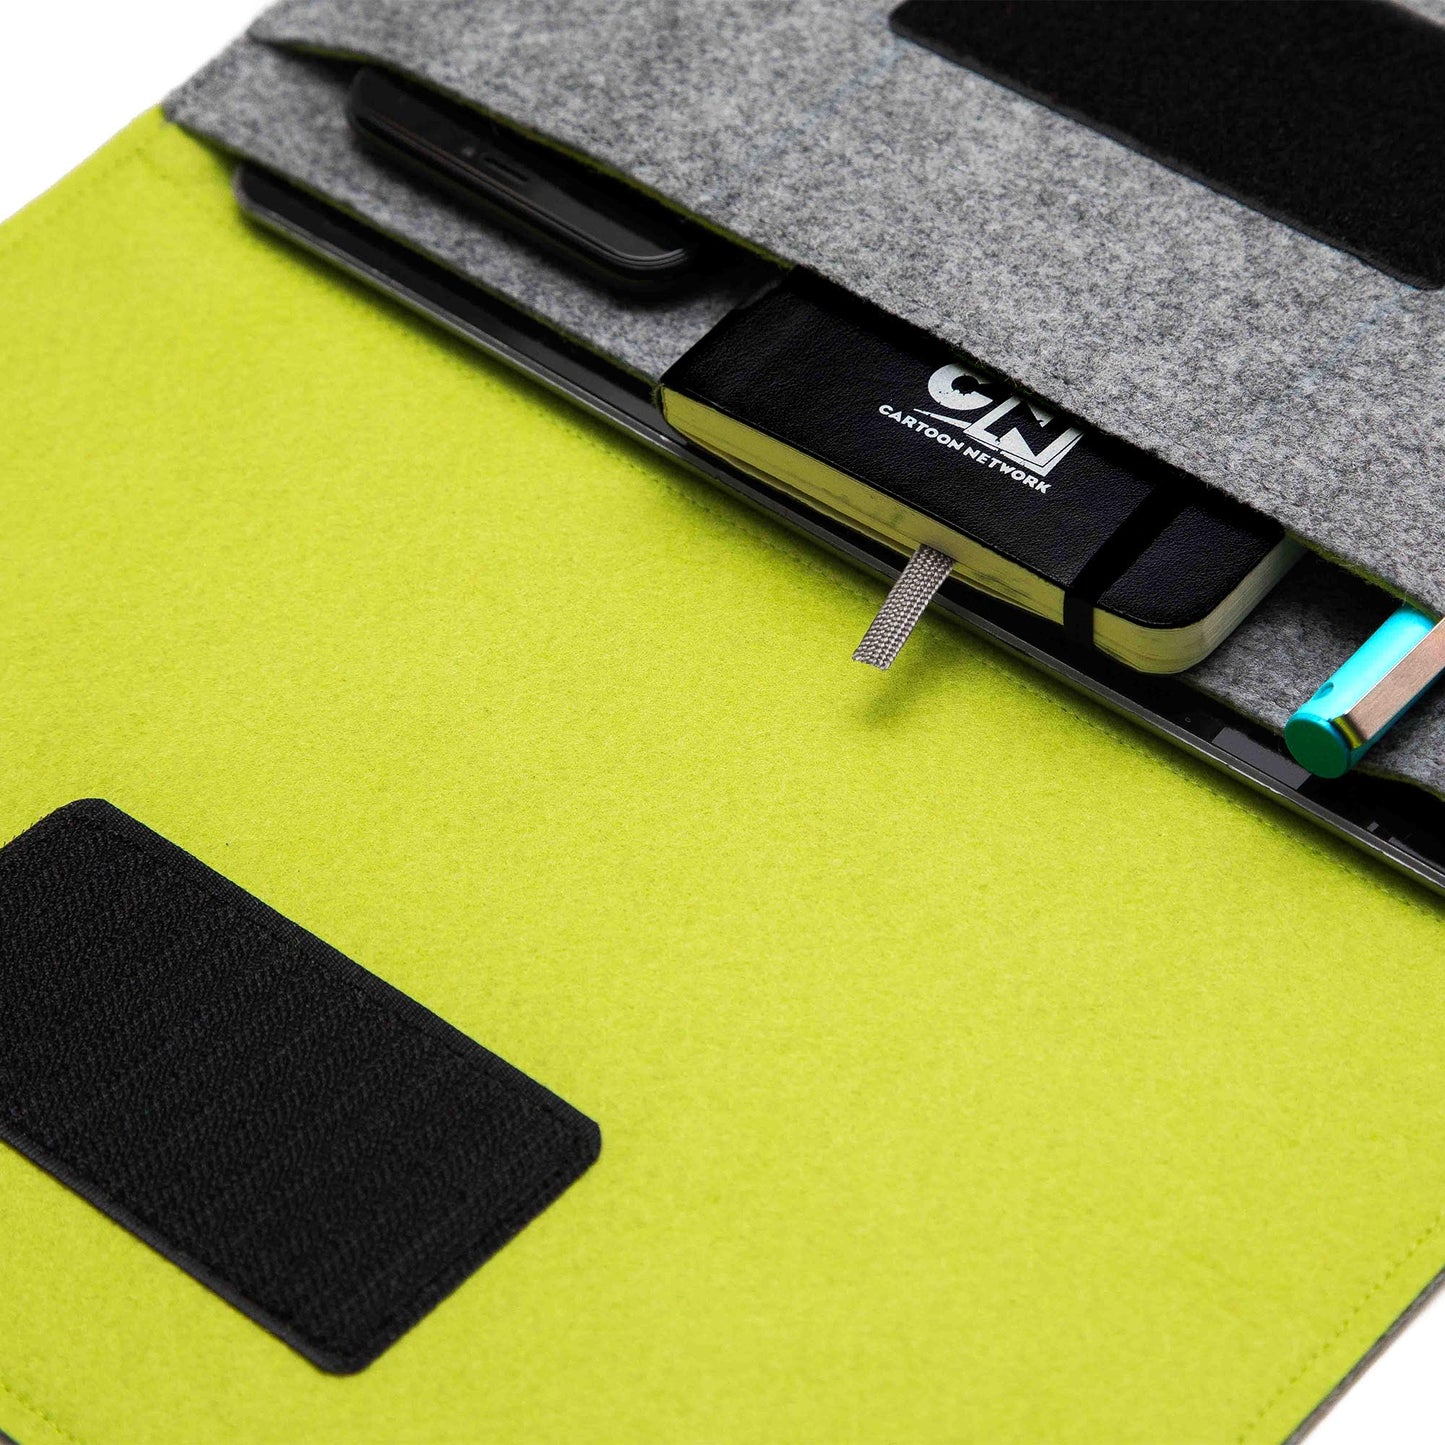 Premium Felt iPad Cover: Ultimate Protection with Accessories Pocket - Grey & Lime